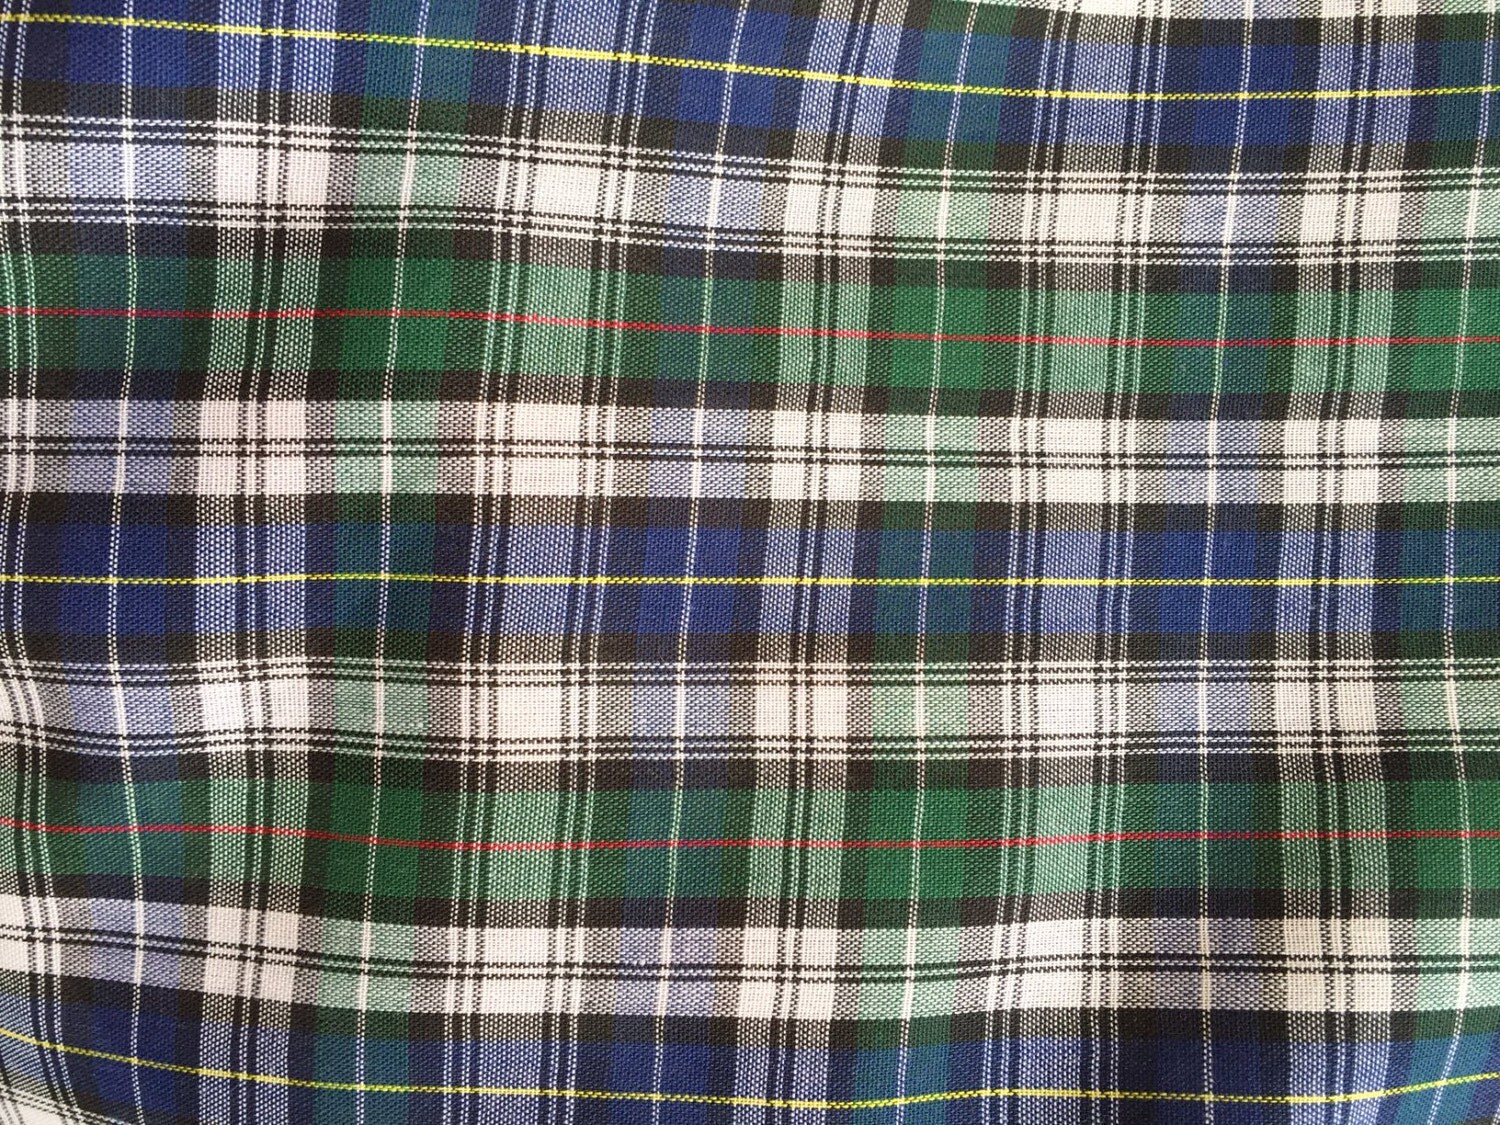 Blue and Green Plaid - 100% Cotton from FinchSewingStudio on Etsy Studio